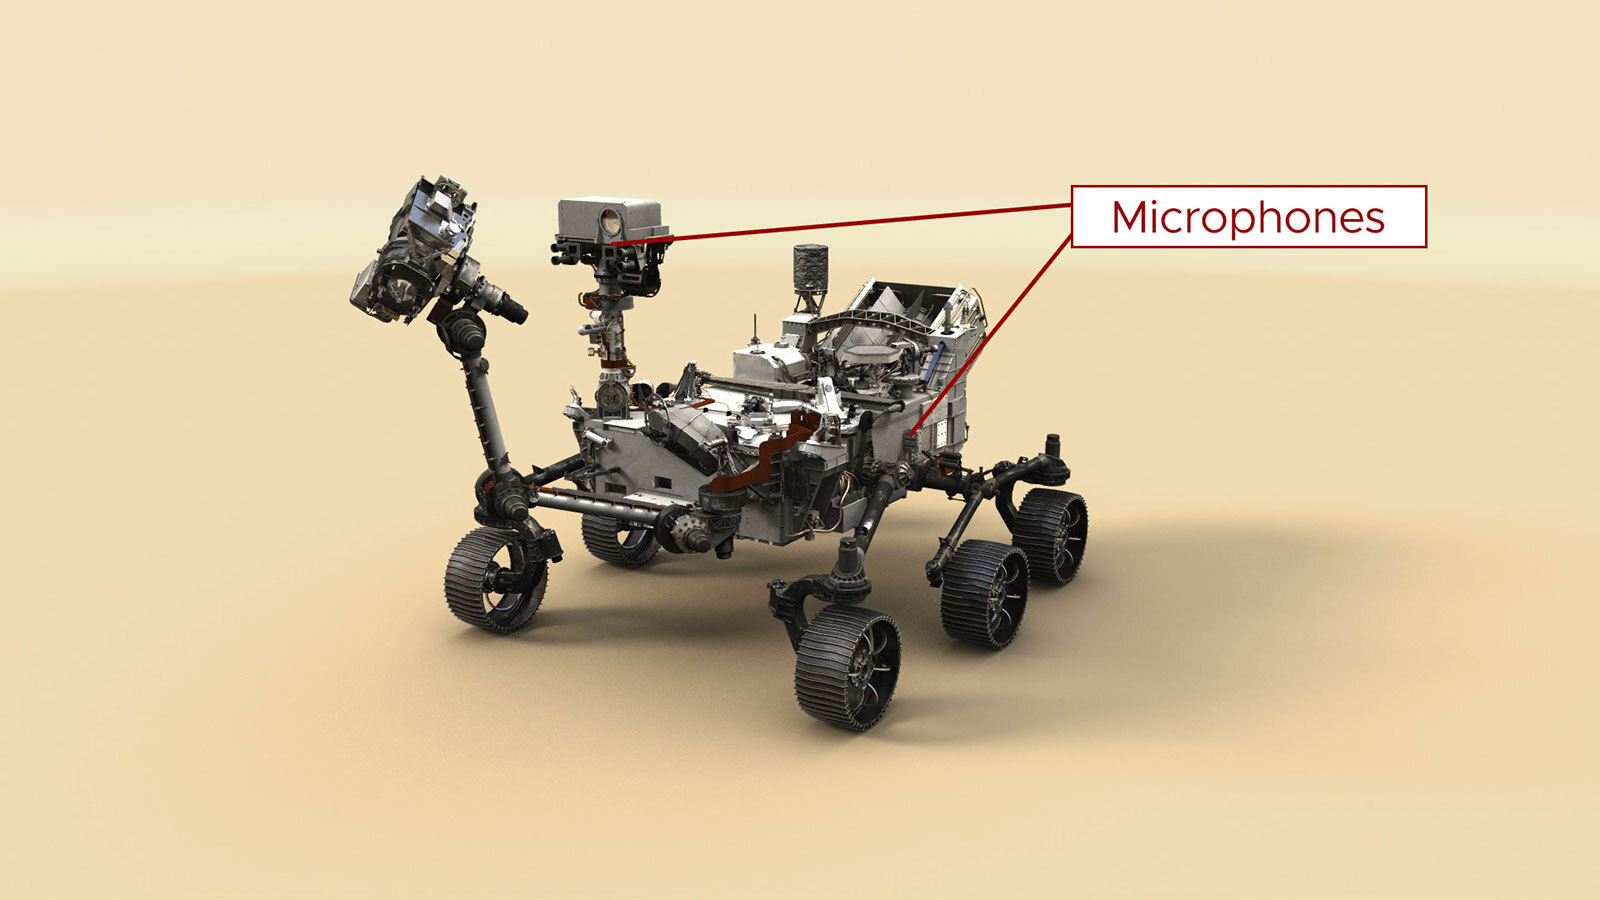 This illustration of NASA’s Perseverance Mars rover indicates the location of its two microphones.